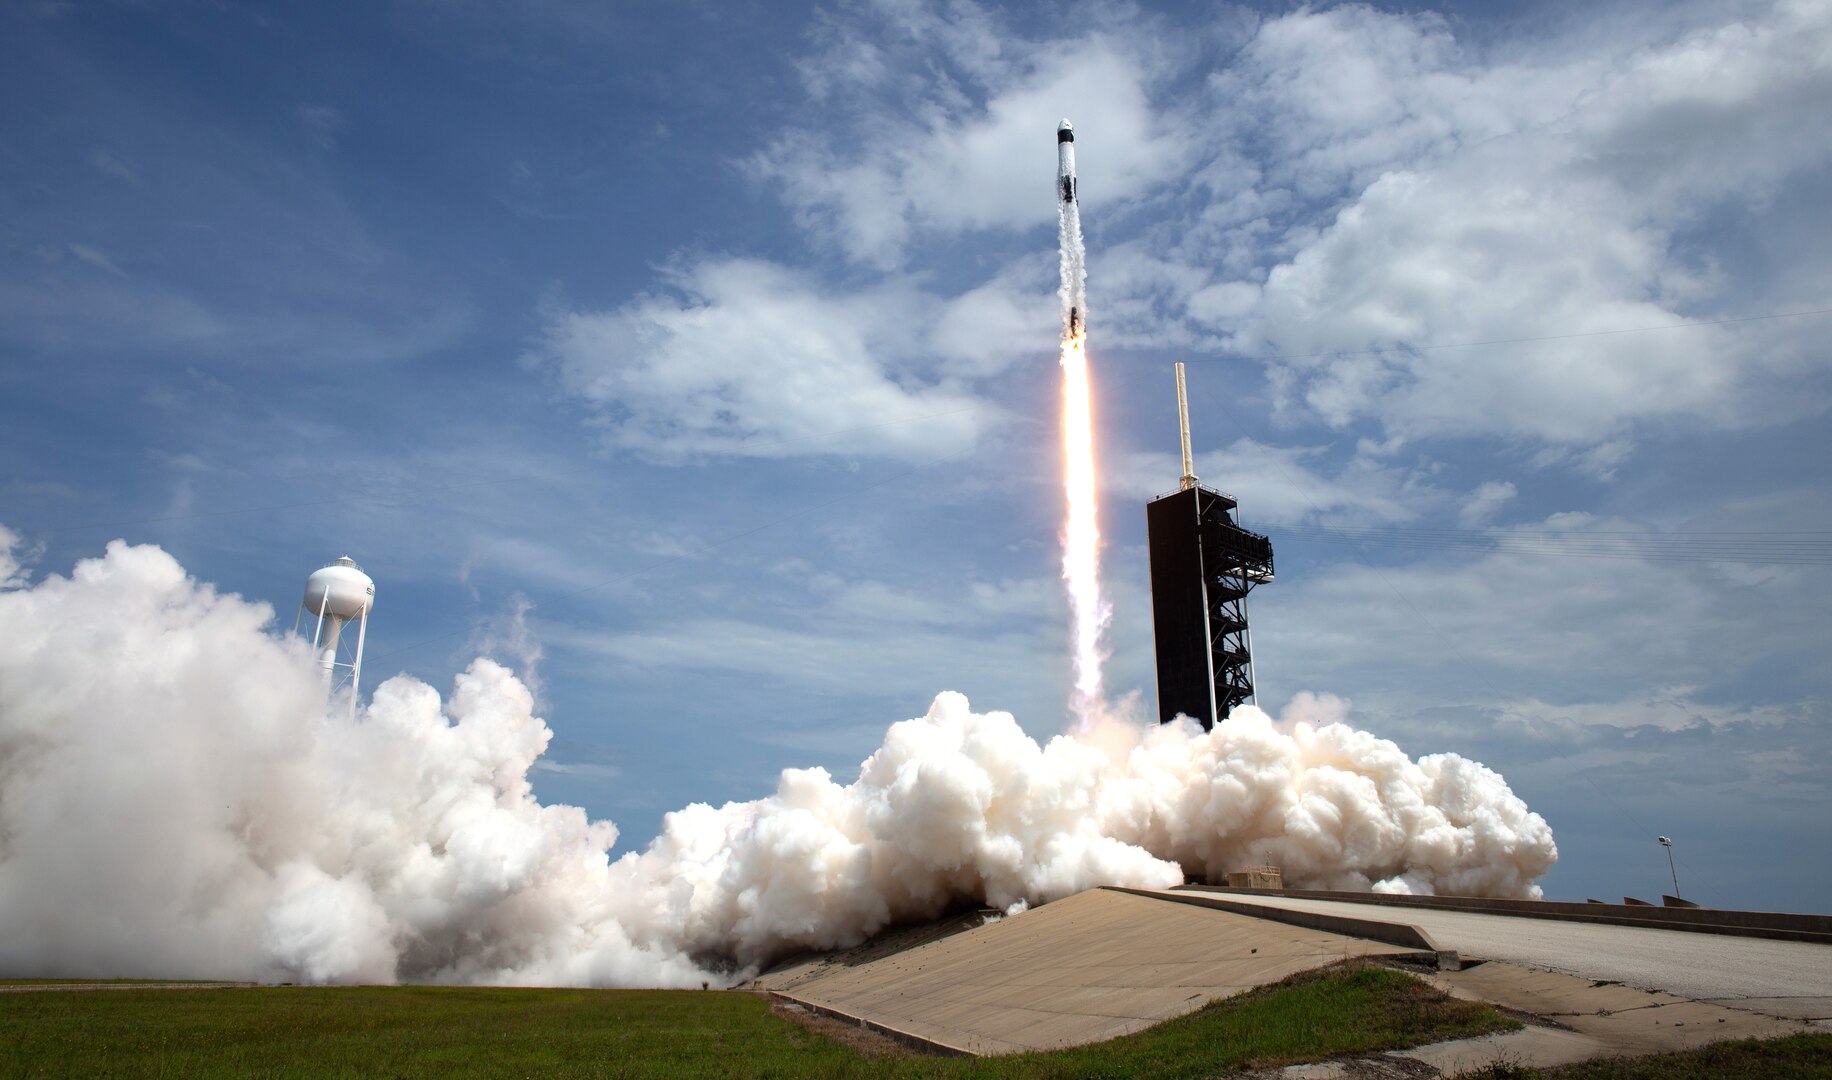 A SpaceX Falcon 9 rocket carrying NASA astronaut and retired Marine Corps Col. Douglas Hurley and fellow crew member Robert Behnken heads skyward during liftoff from Launch Complex 39A at NASA’s Kennedy Space Center, Florida, May 30, 2020. The mission marks the resumption of human space flight from the United States. Air National Guard members in Alaska and Hawaii provided support to the launch mission.